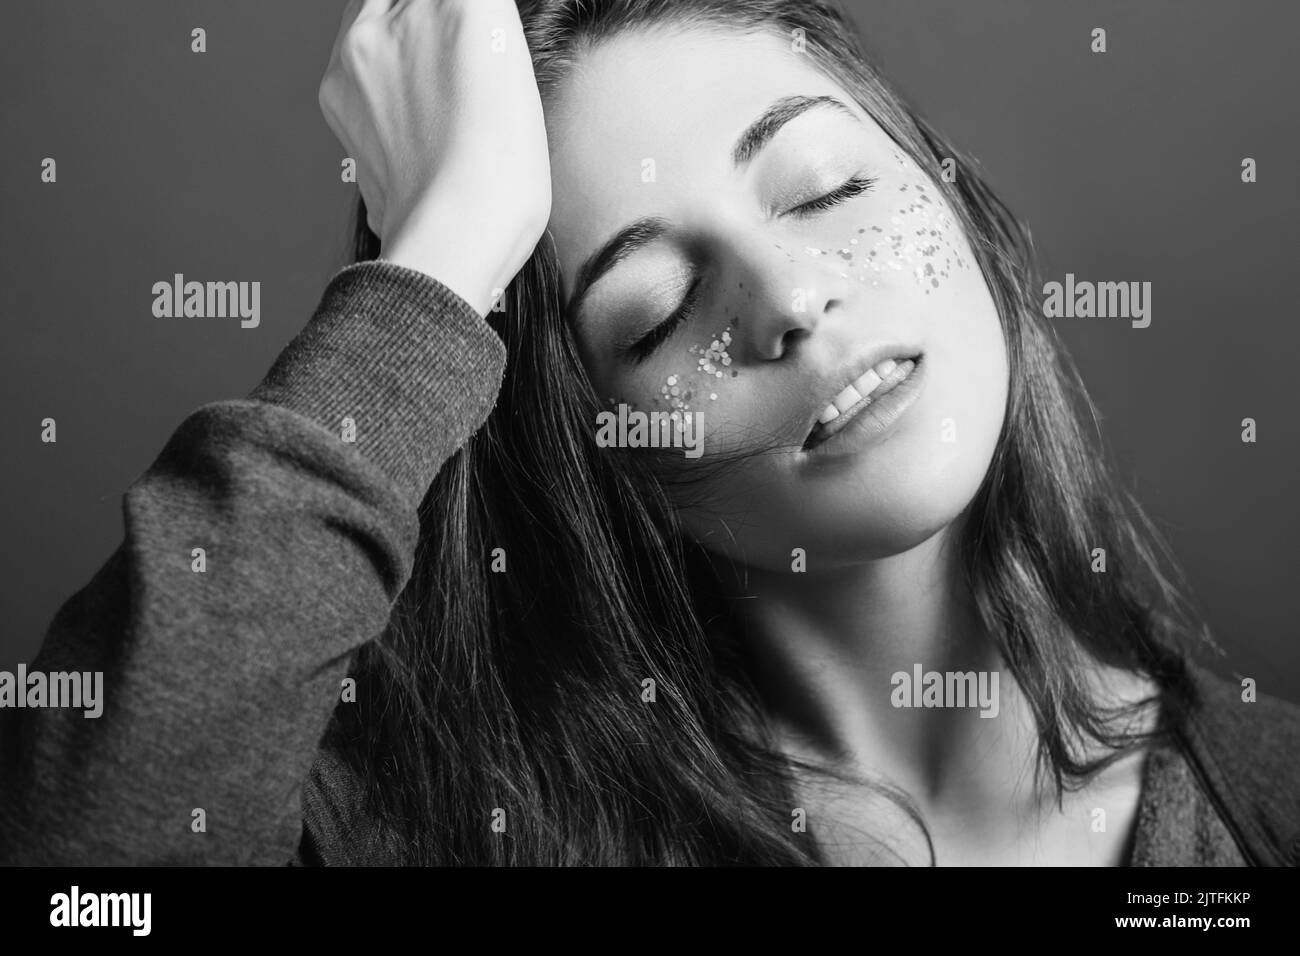 weary young woman exhaustion sleep deprivation Stock Photo